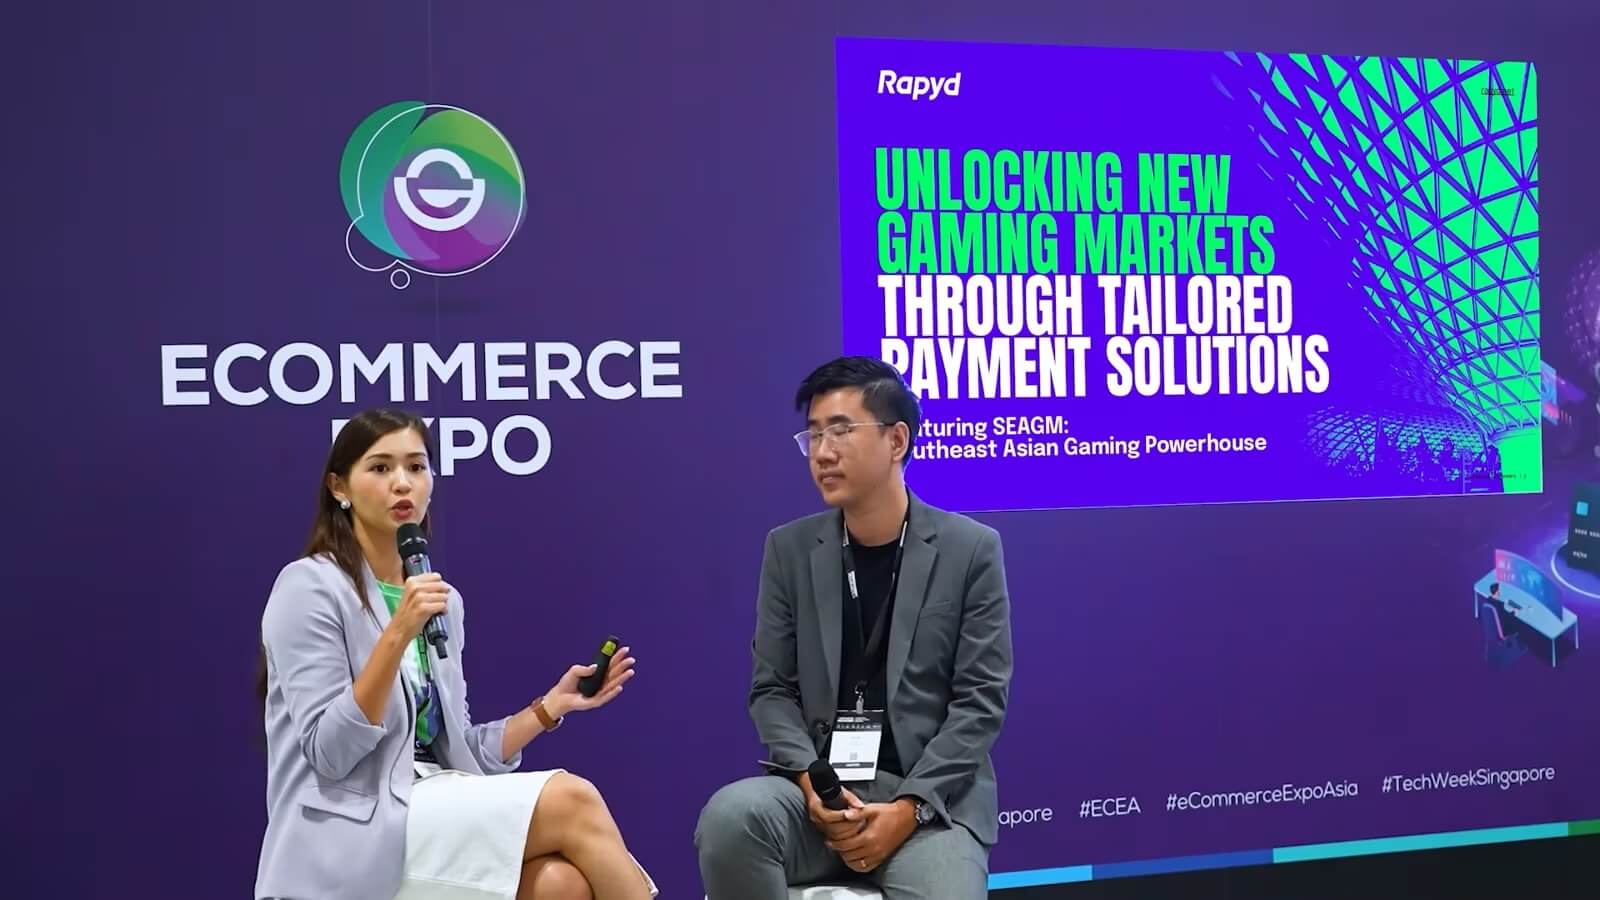 2 speakers talk about the unlocking new gaming markets topic